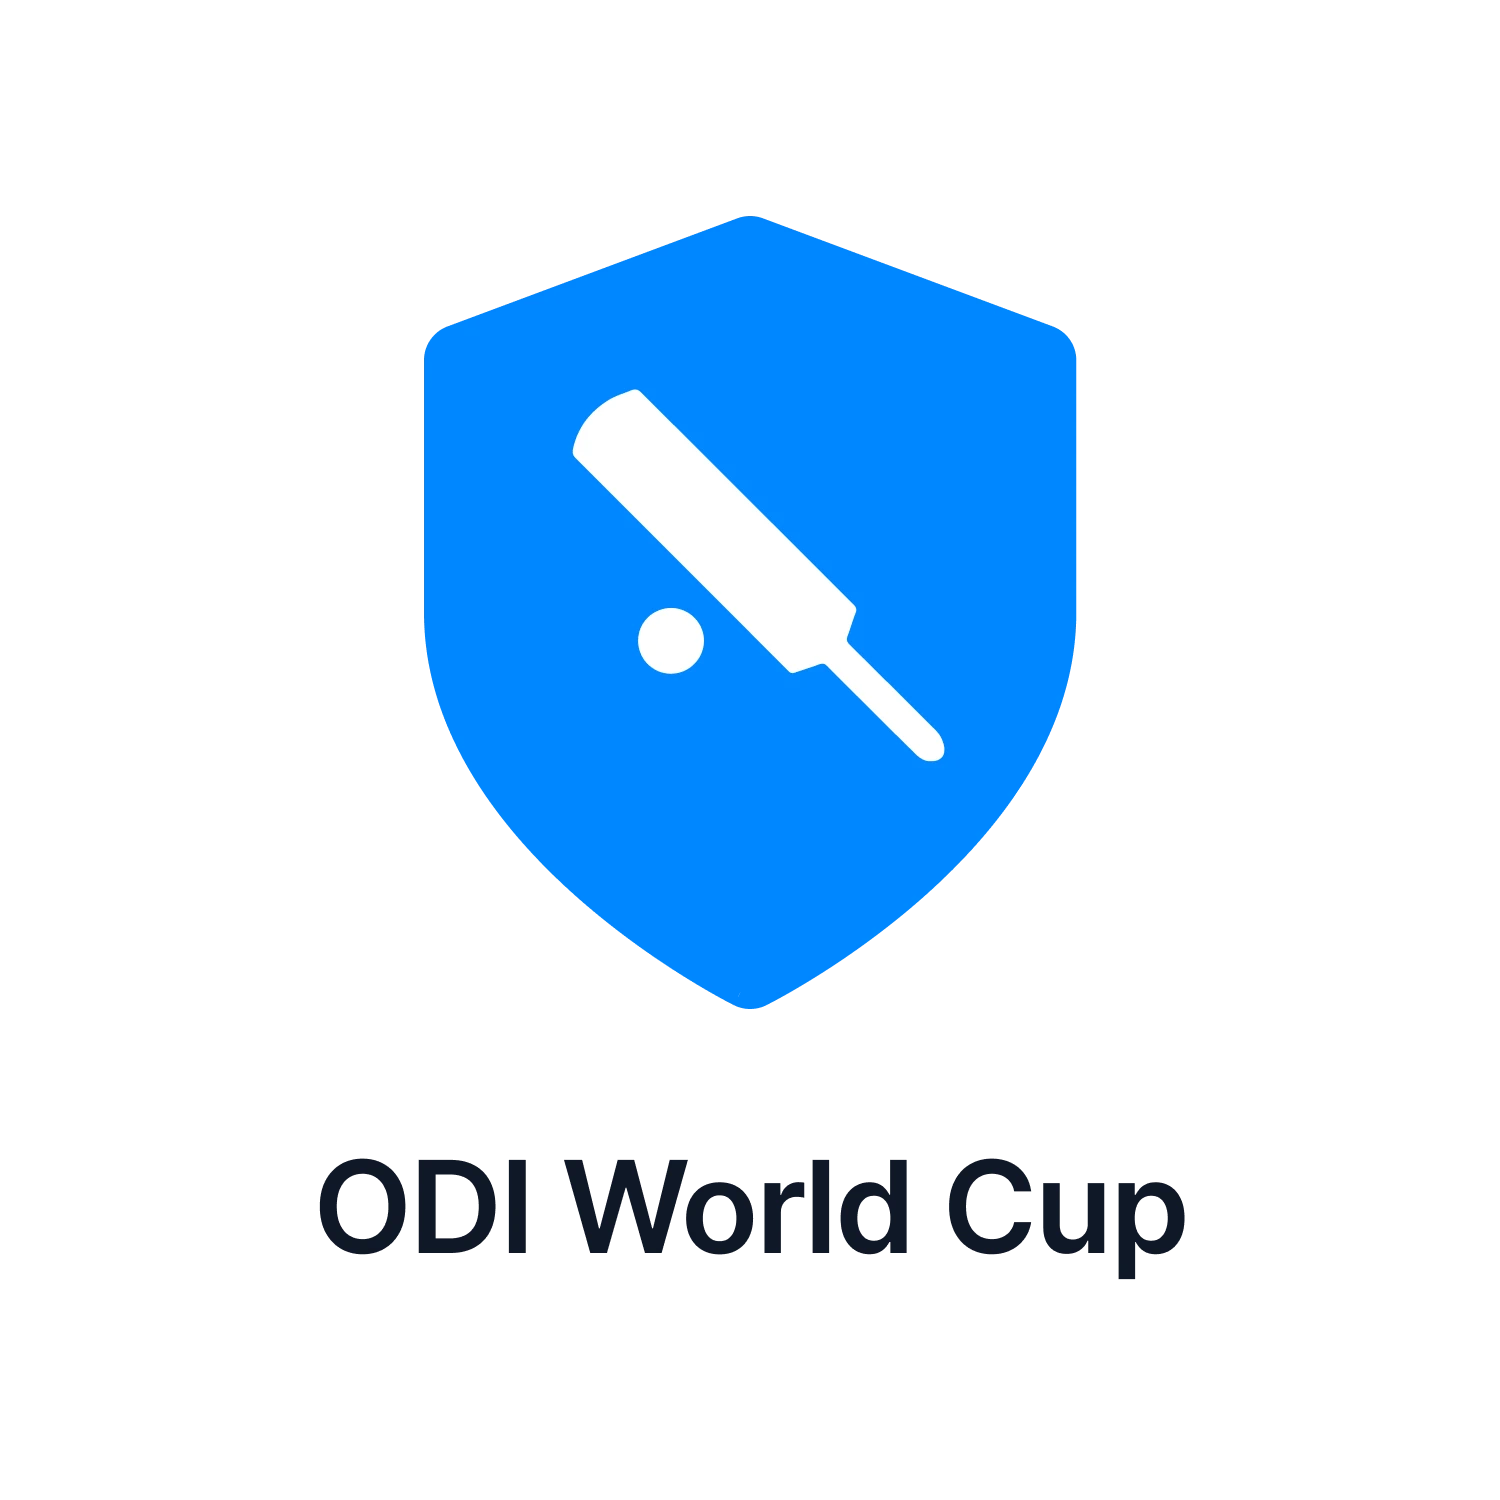 Read the expert predictions for ODI World Cup.